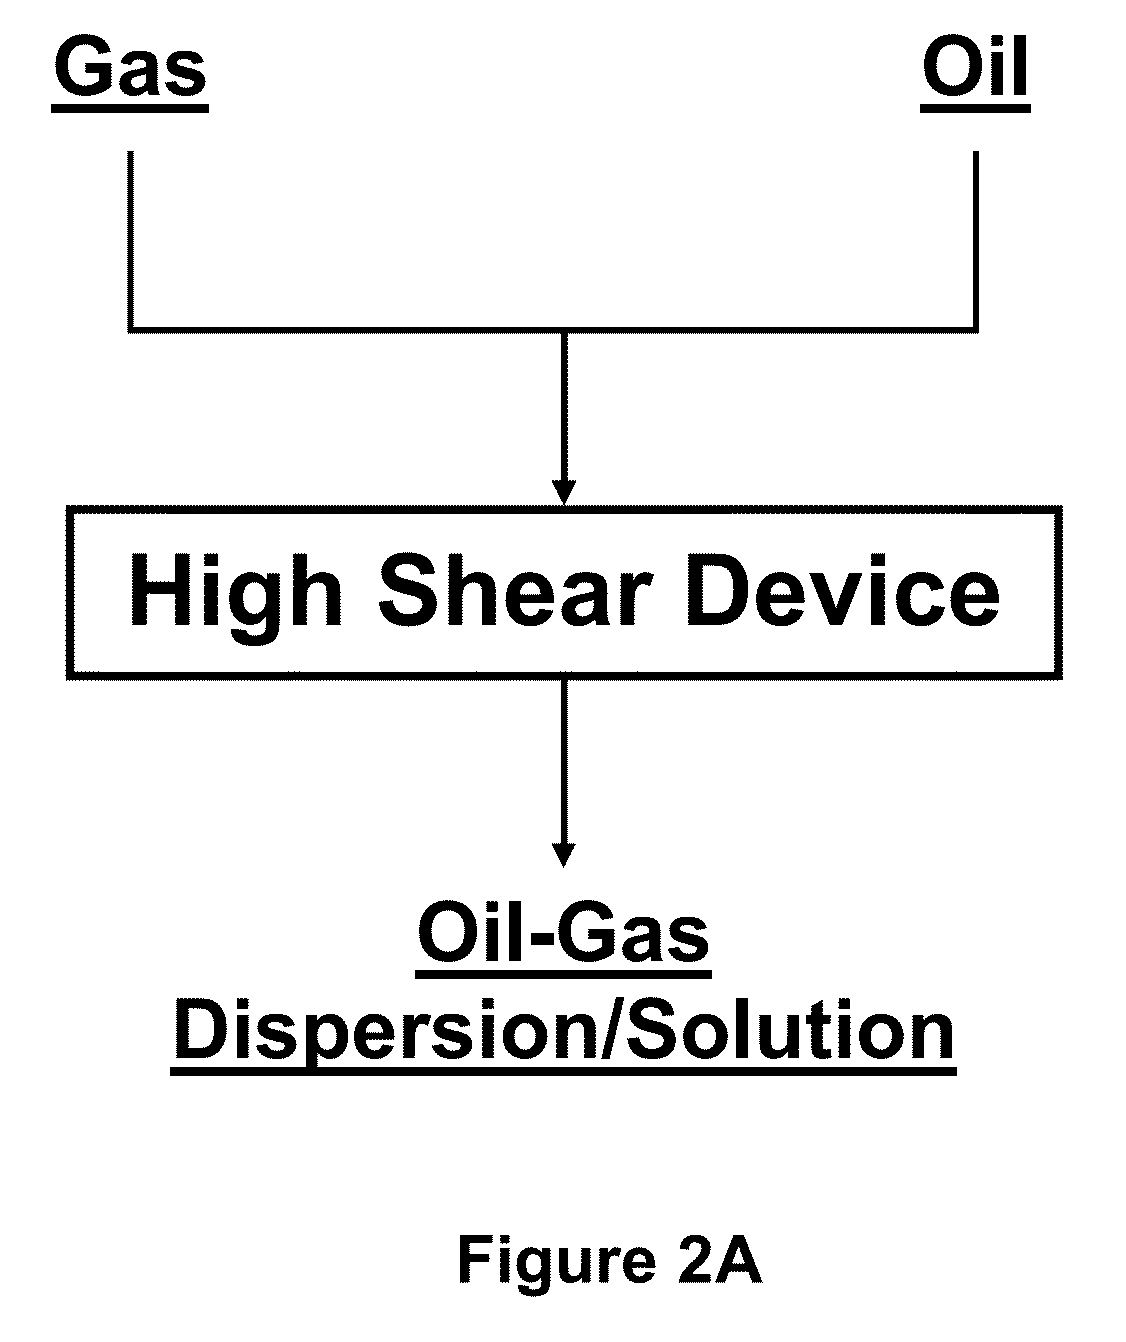 High shear application in processing oils